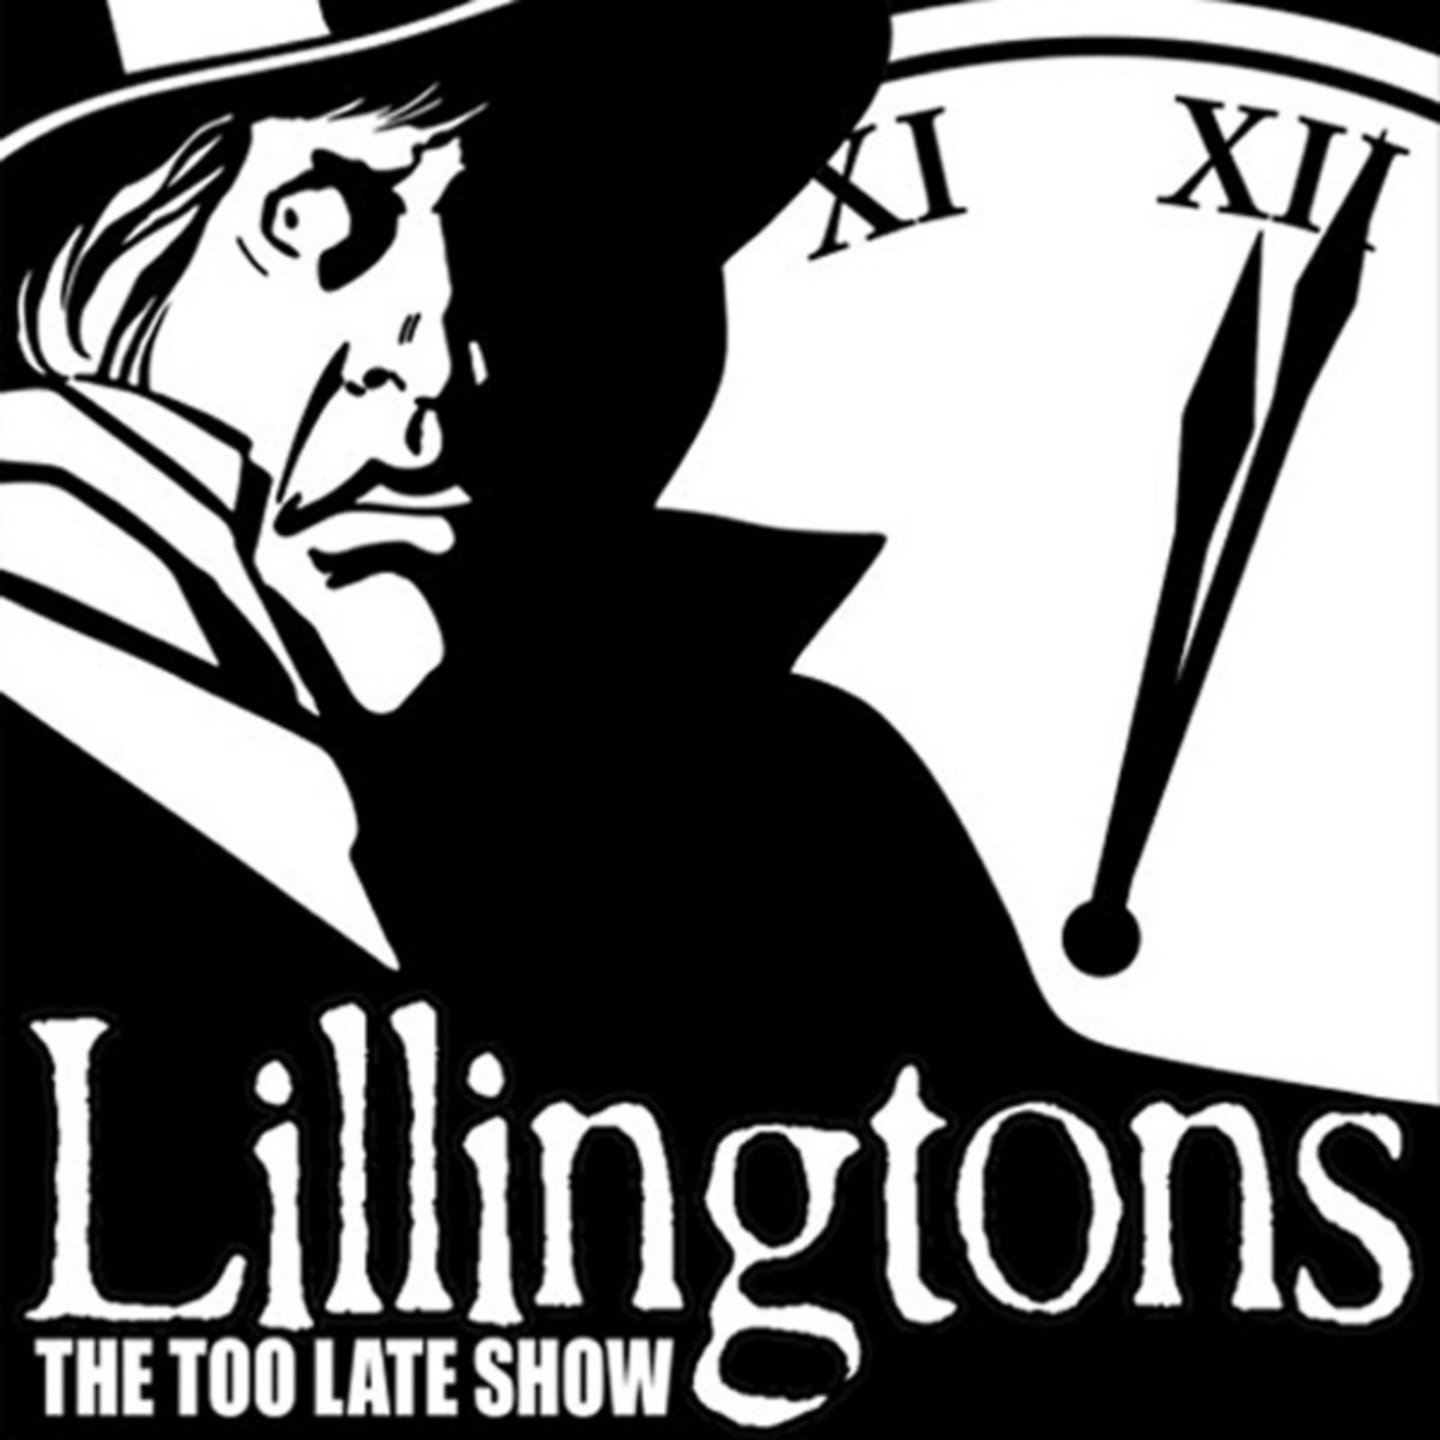 LILLINGTONS, THE - The Too Late Show LP